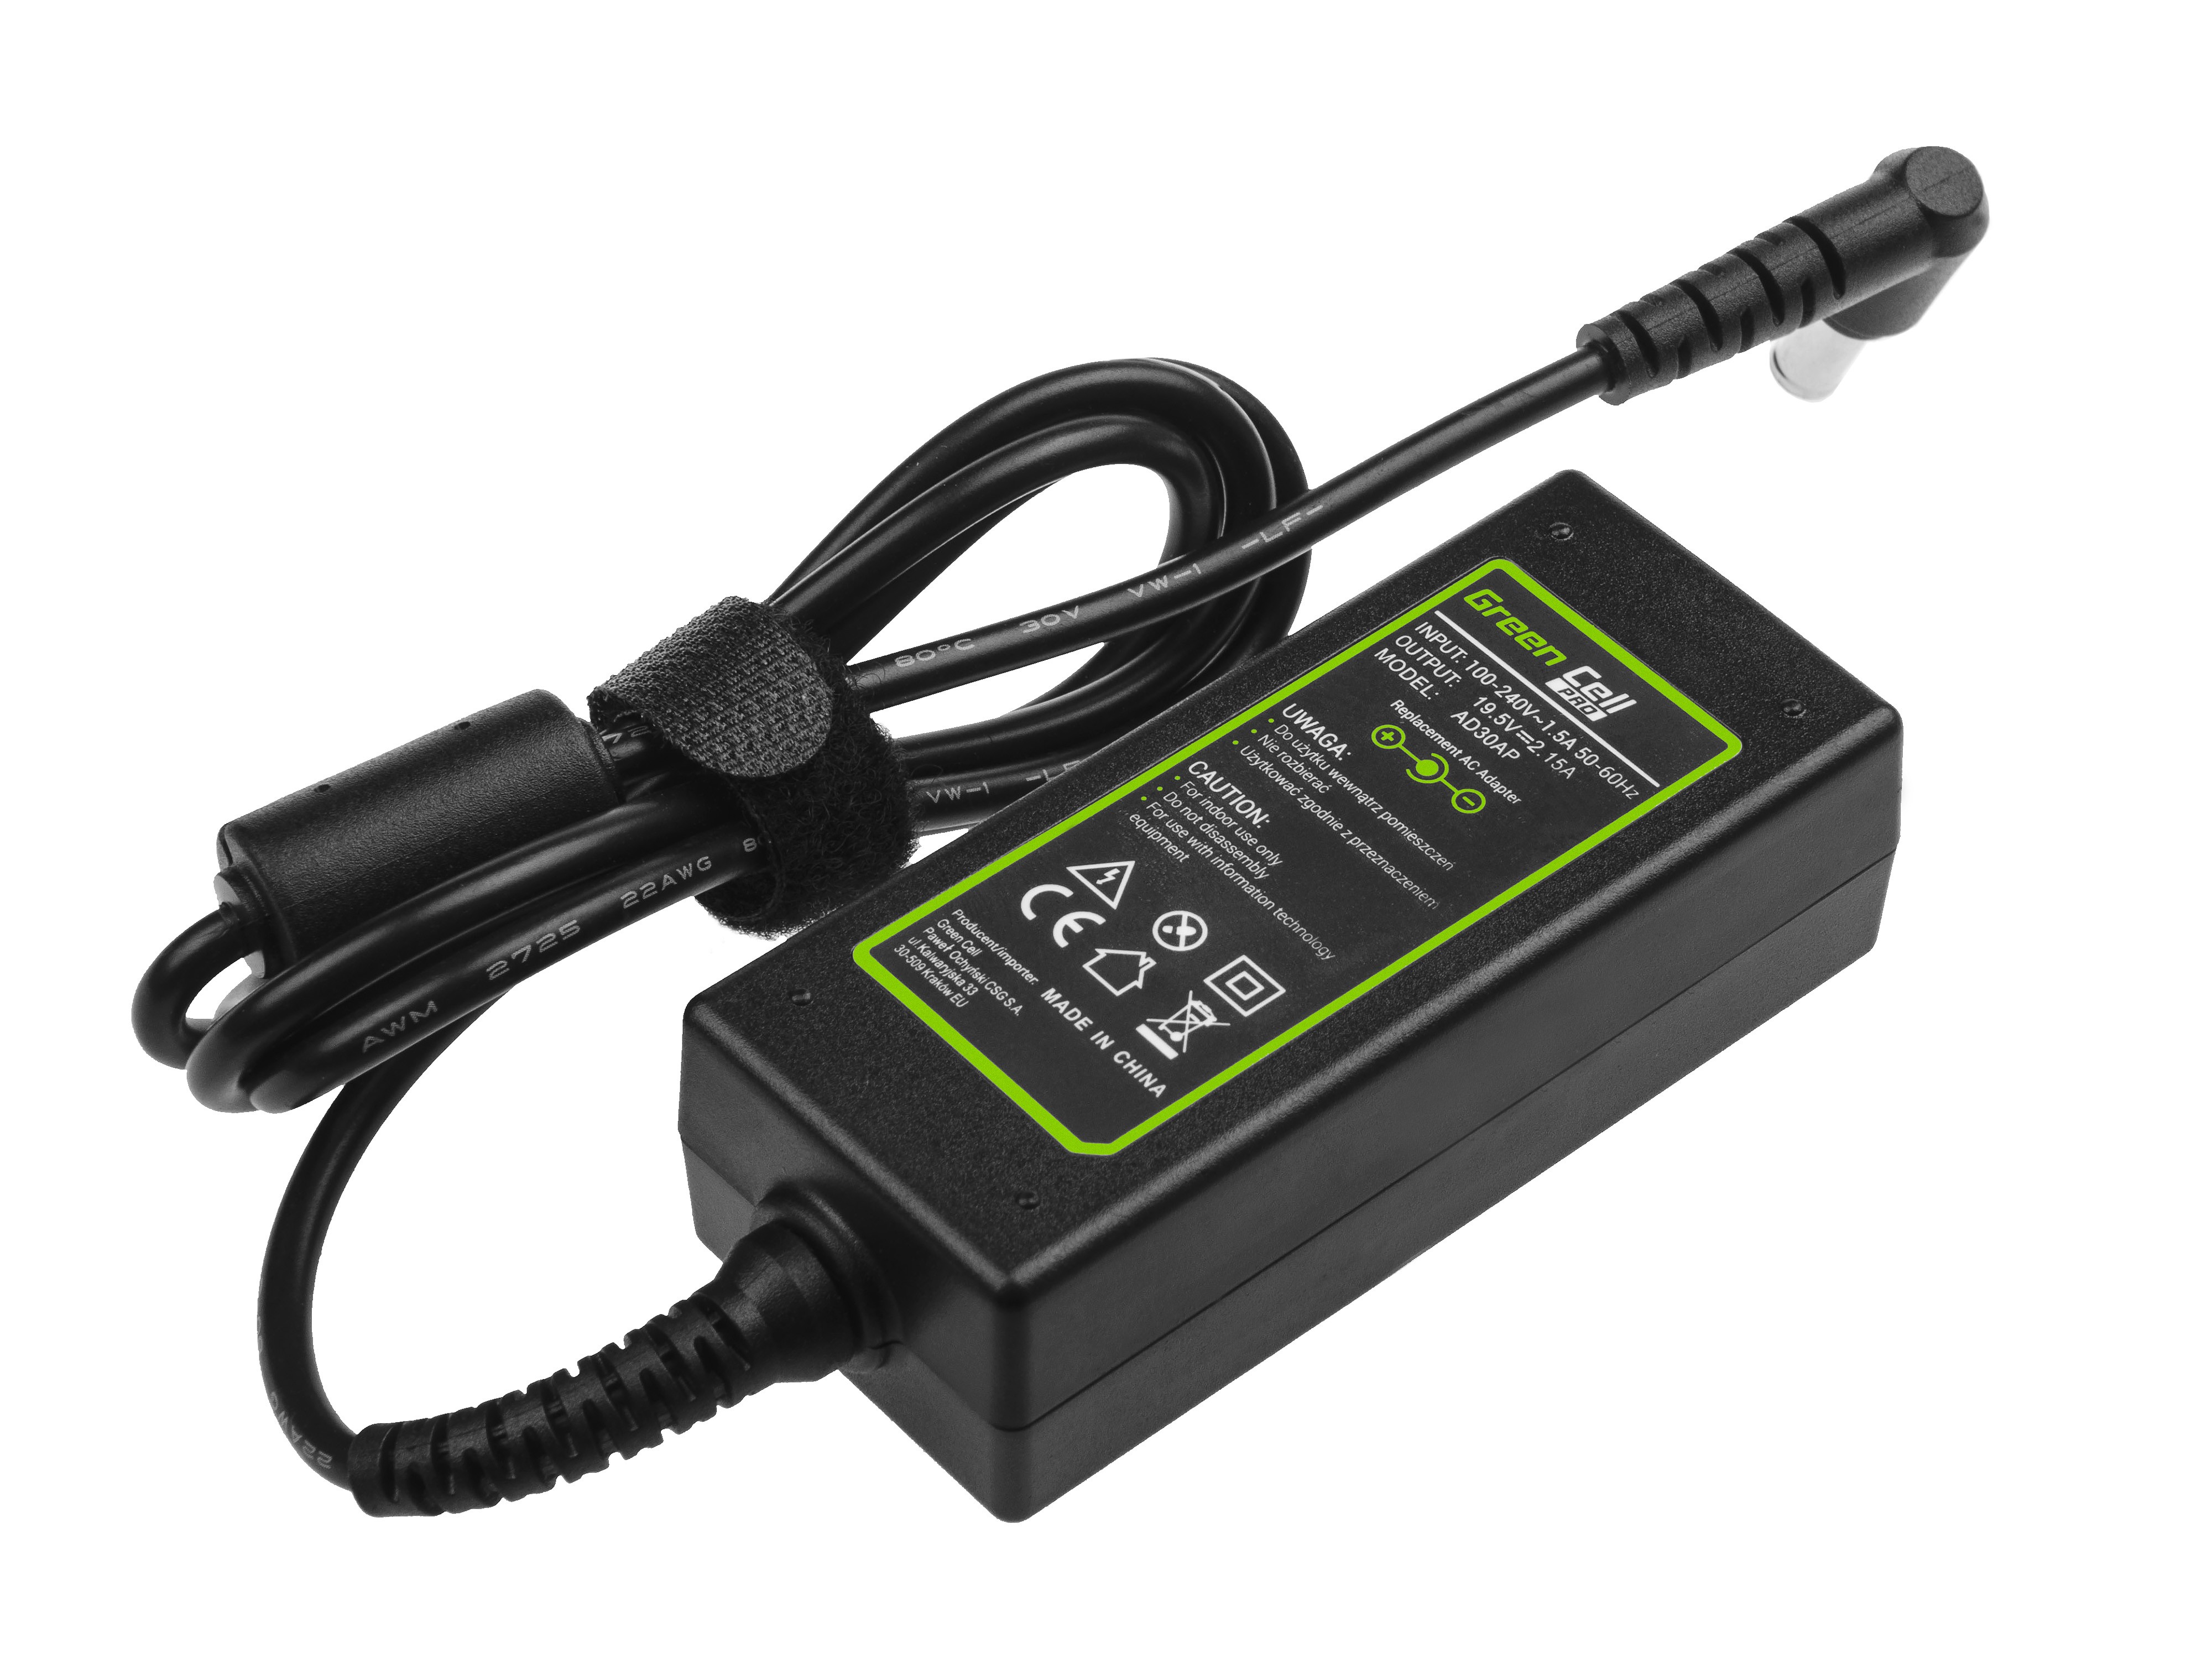 PRO Oplader  AC Adapter voor Sony Vaio W11 W12 PCG-31311M PCG-31311L VPCYB1S1E VPCYB3V1E 19.5V 2.15A 40W